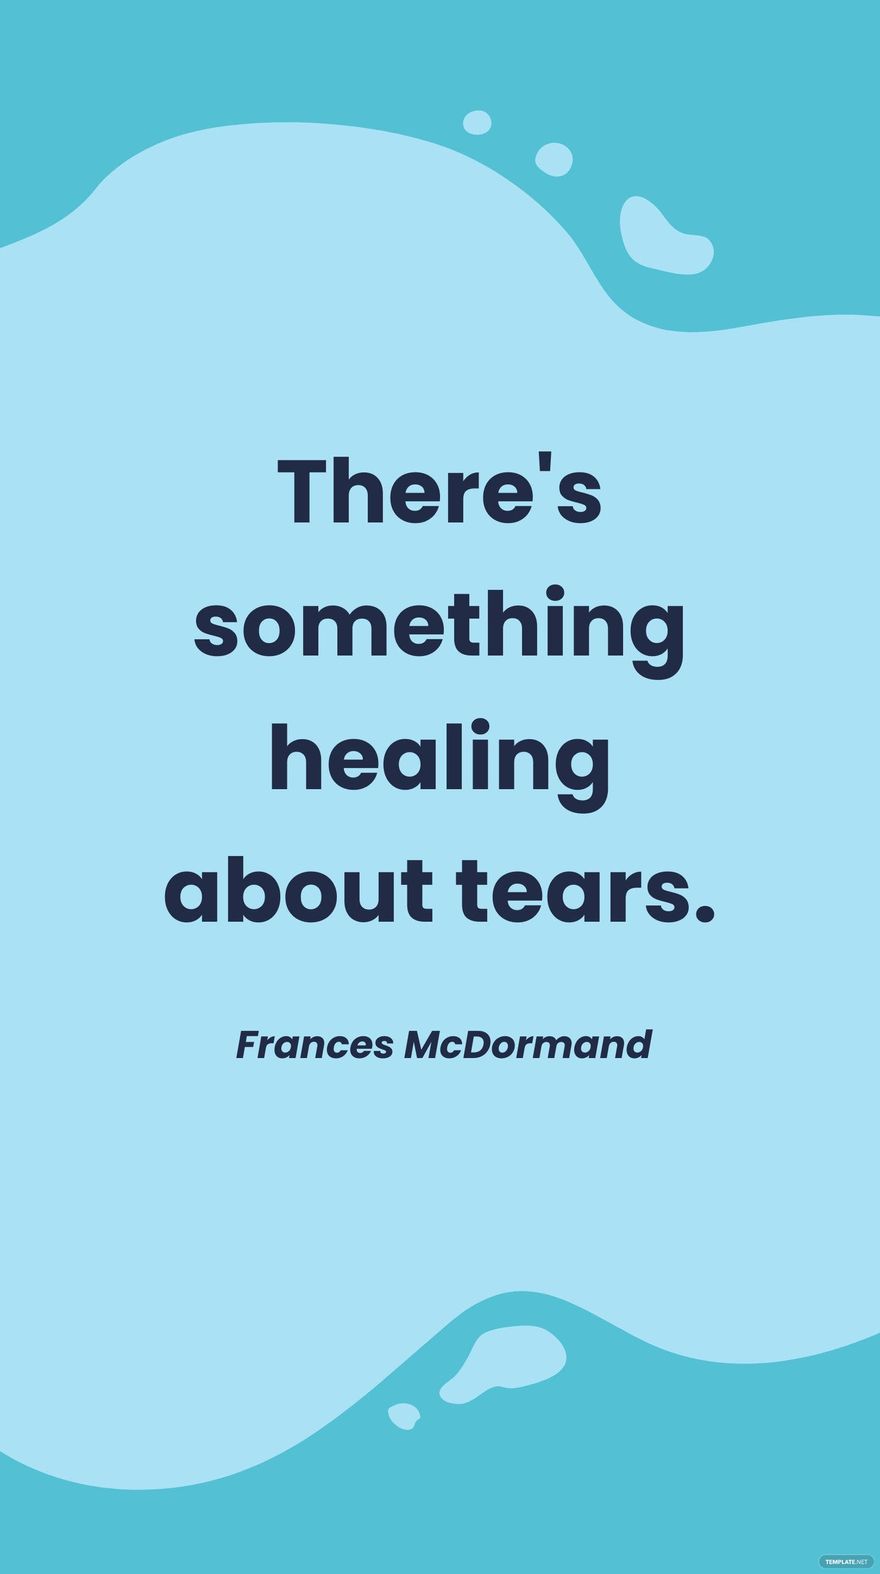 Frances McDormand -There's something healing about tears.